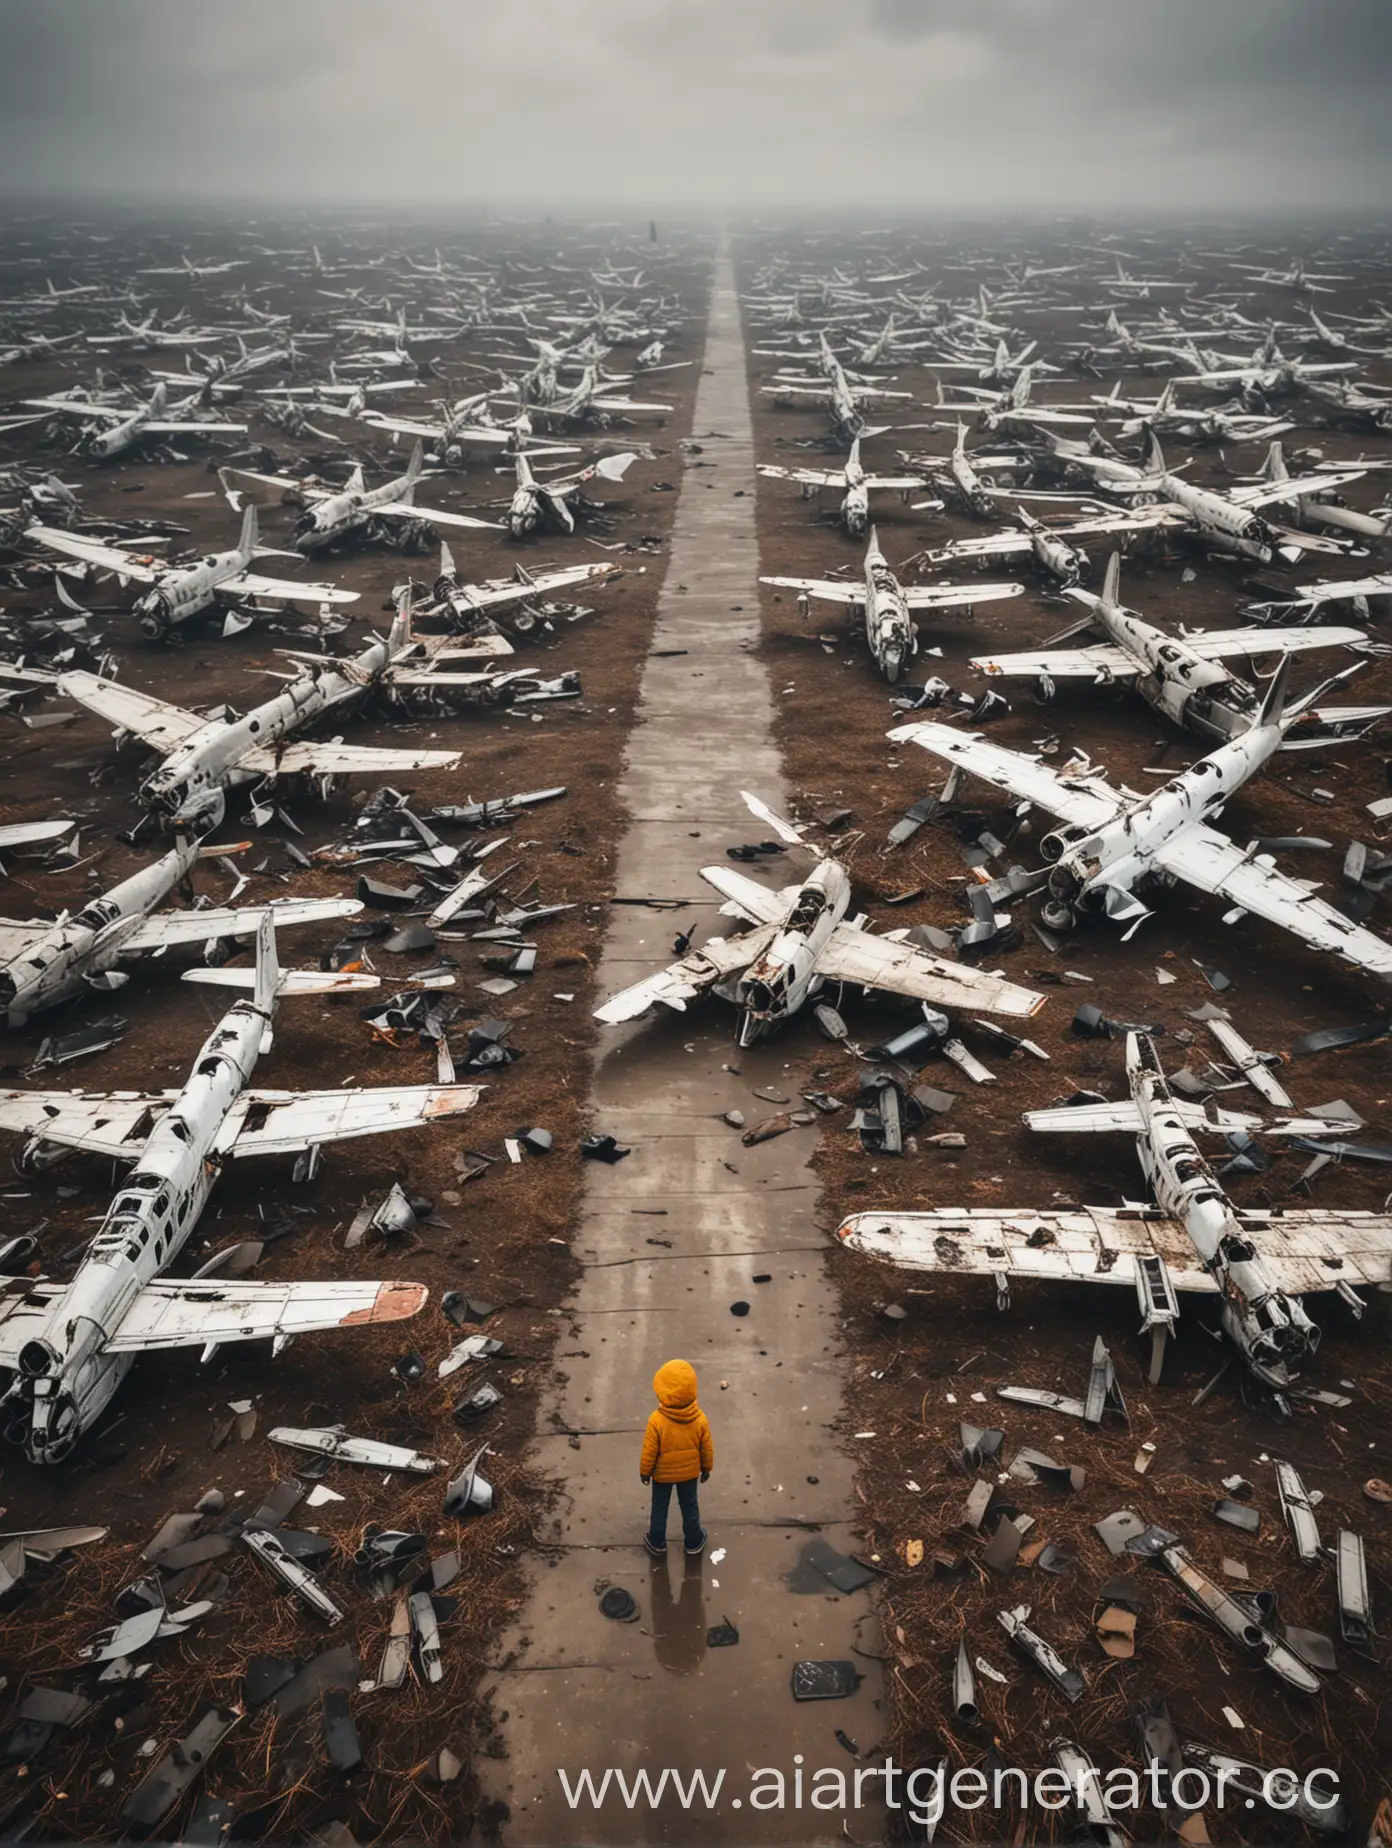 Lonely-Figure-Amidst-Wrecked-Airplanes